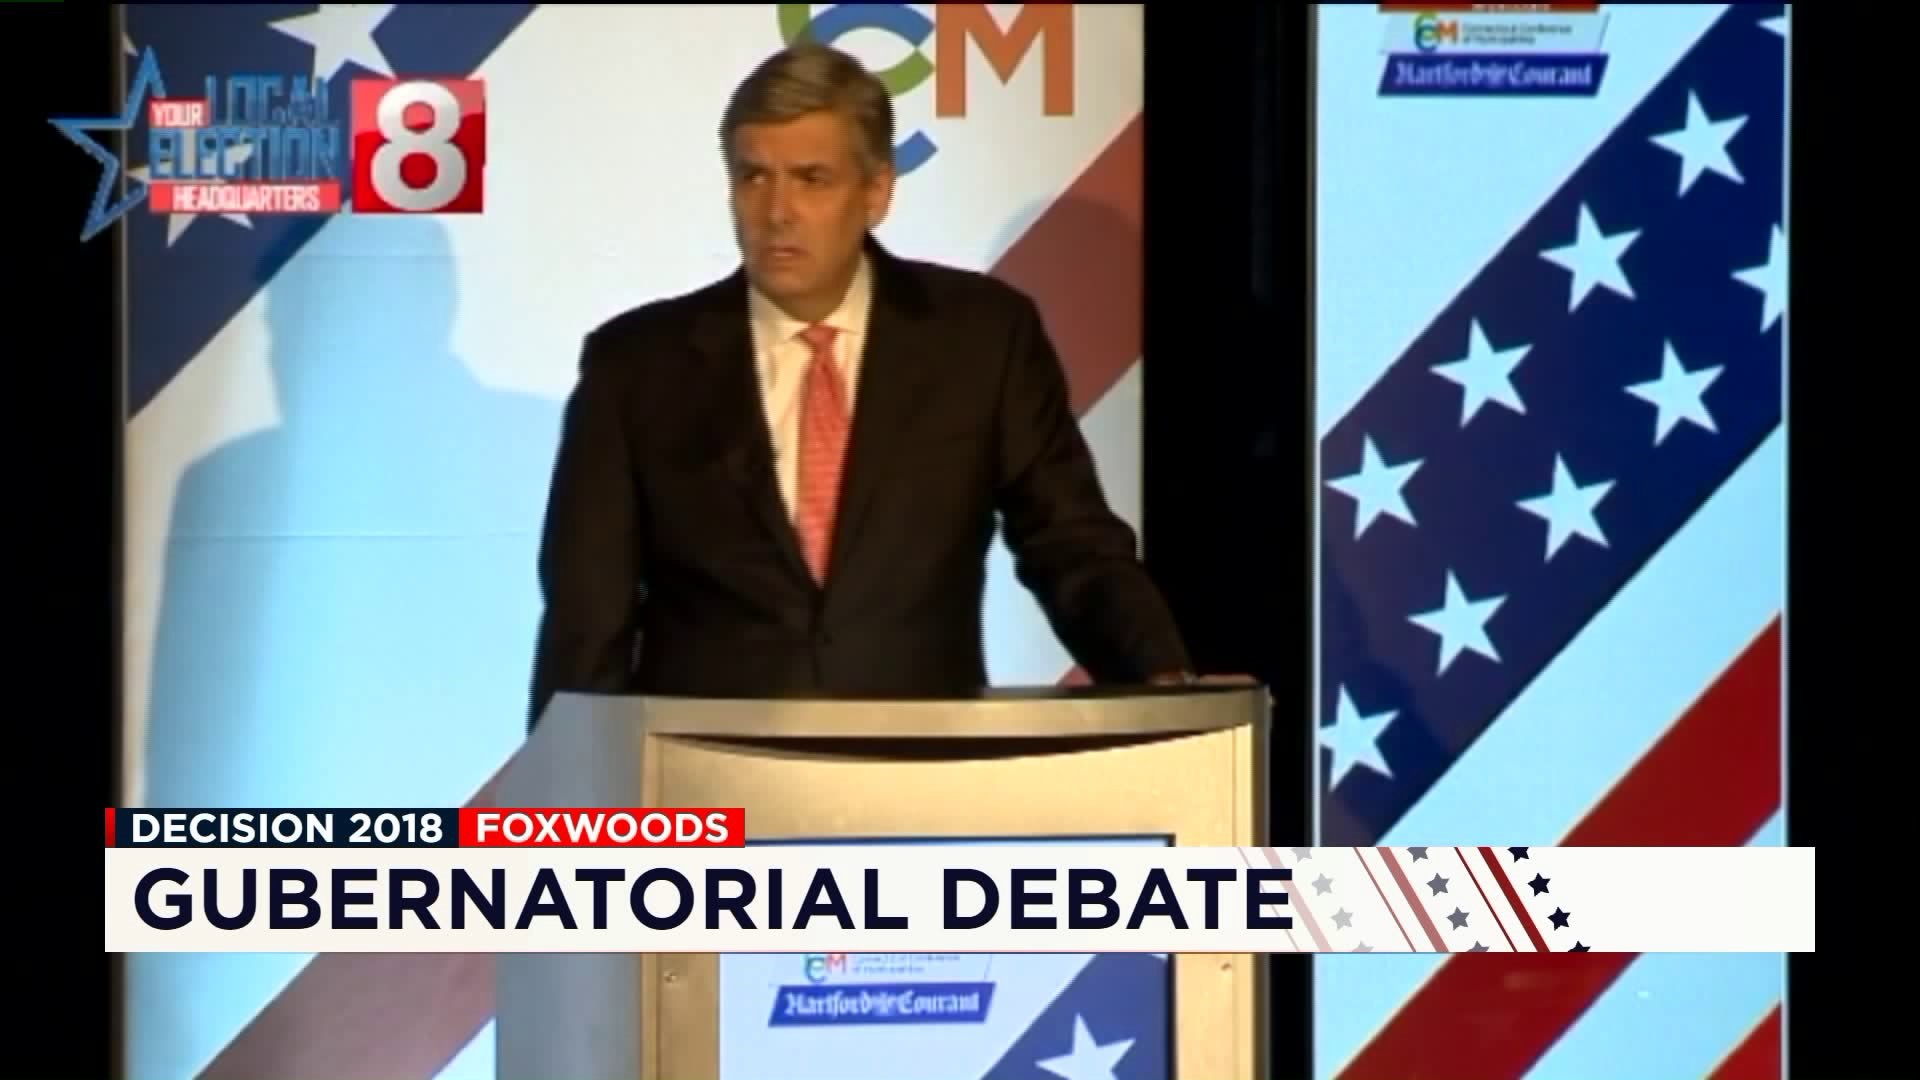 Gubernatorial candidates square off in debate before election